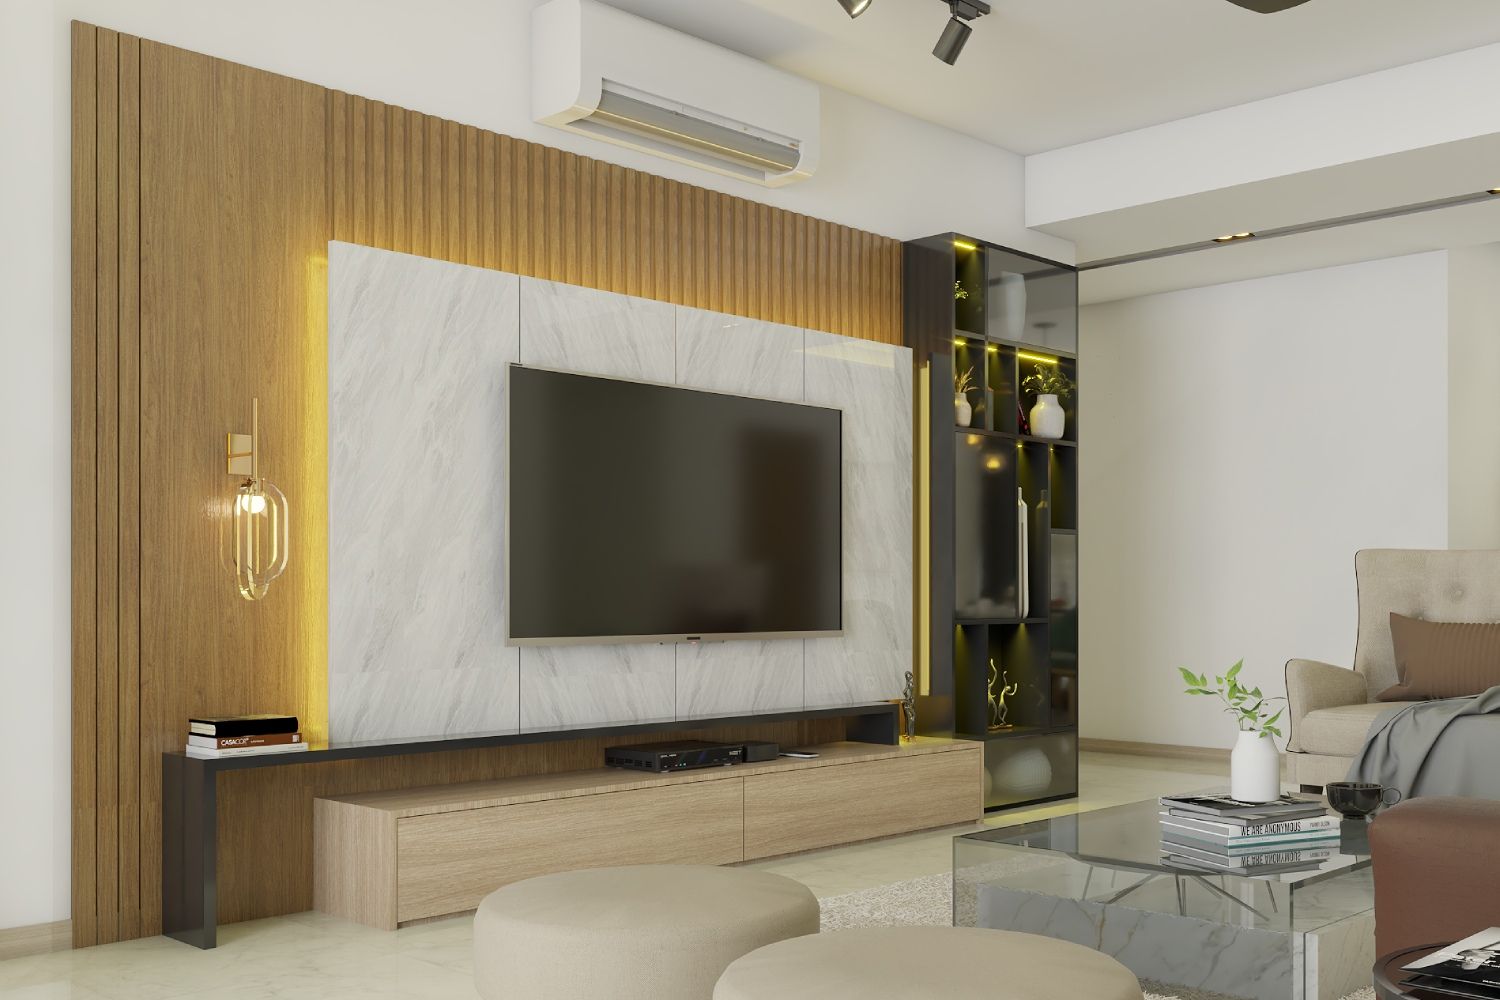 Modern TV Unit Design With Two Floor-Mounted Drawers